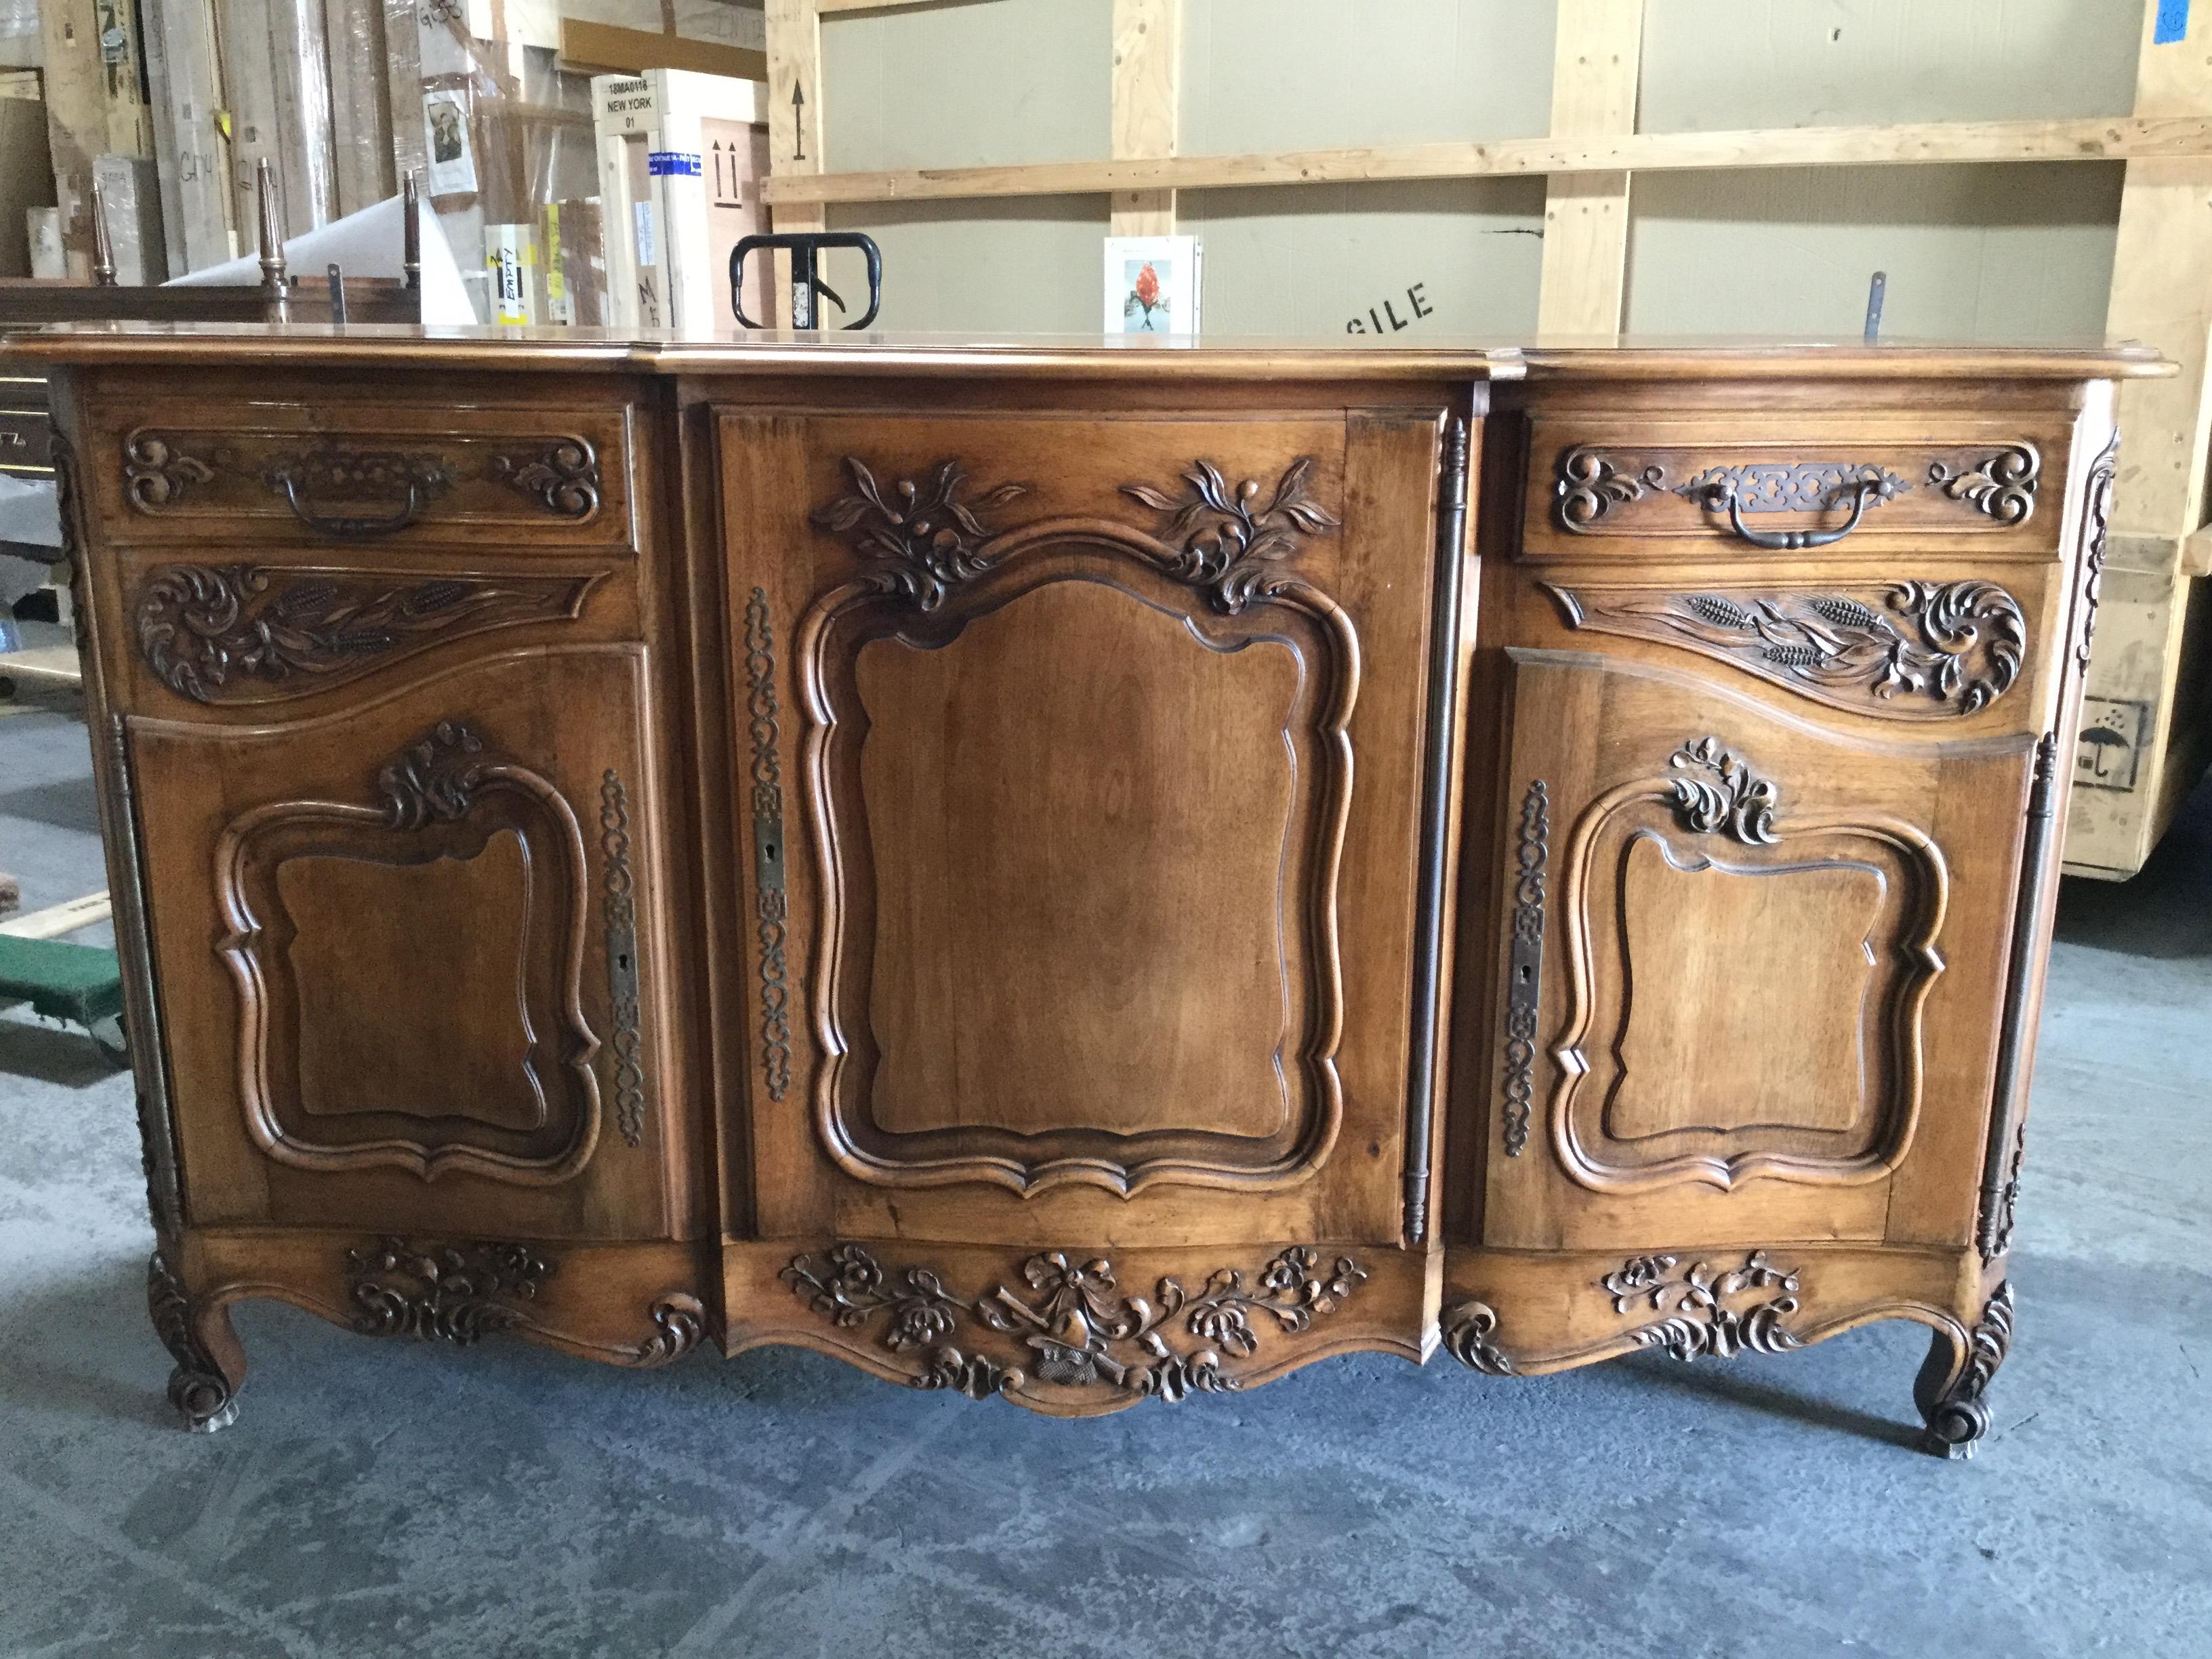 Provencal classic hand rubbed walnut buffet sideboard, having gorgeous carvings which represent typical themes from the Provence region such as olive branche, leaves, wheat bundles, and floral motifs. Beautifully carved with rounded sides and plenty